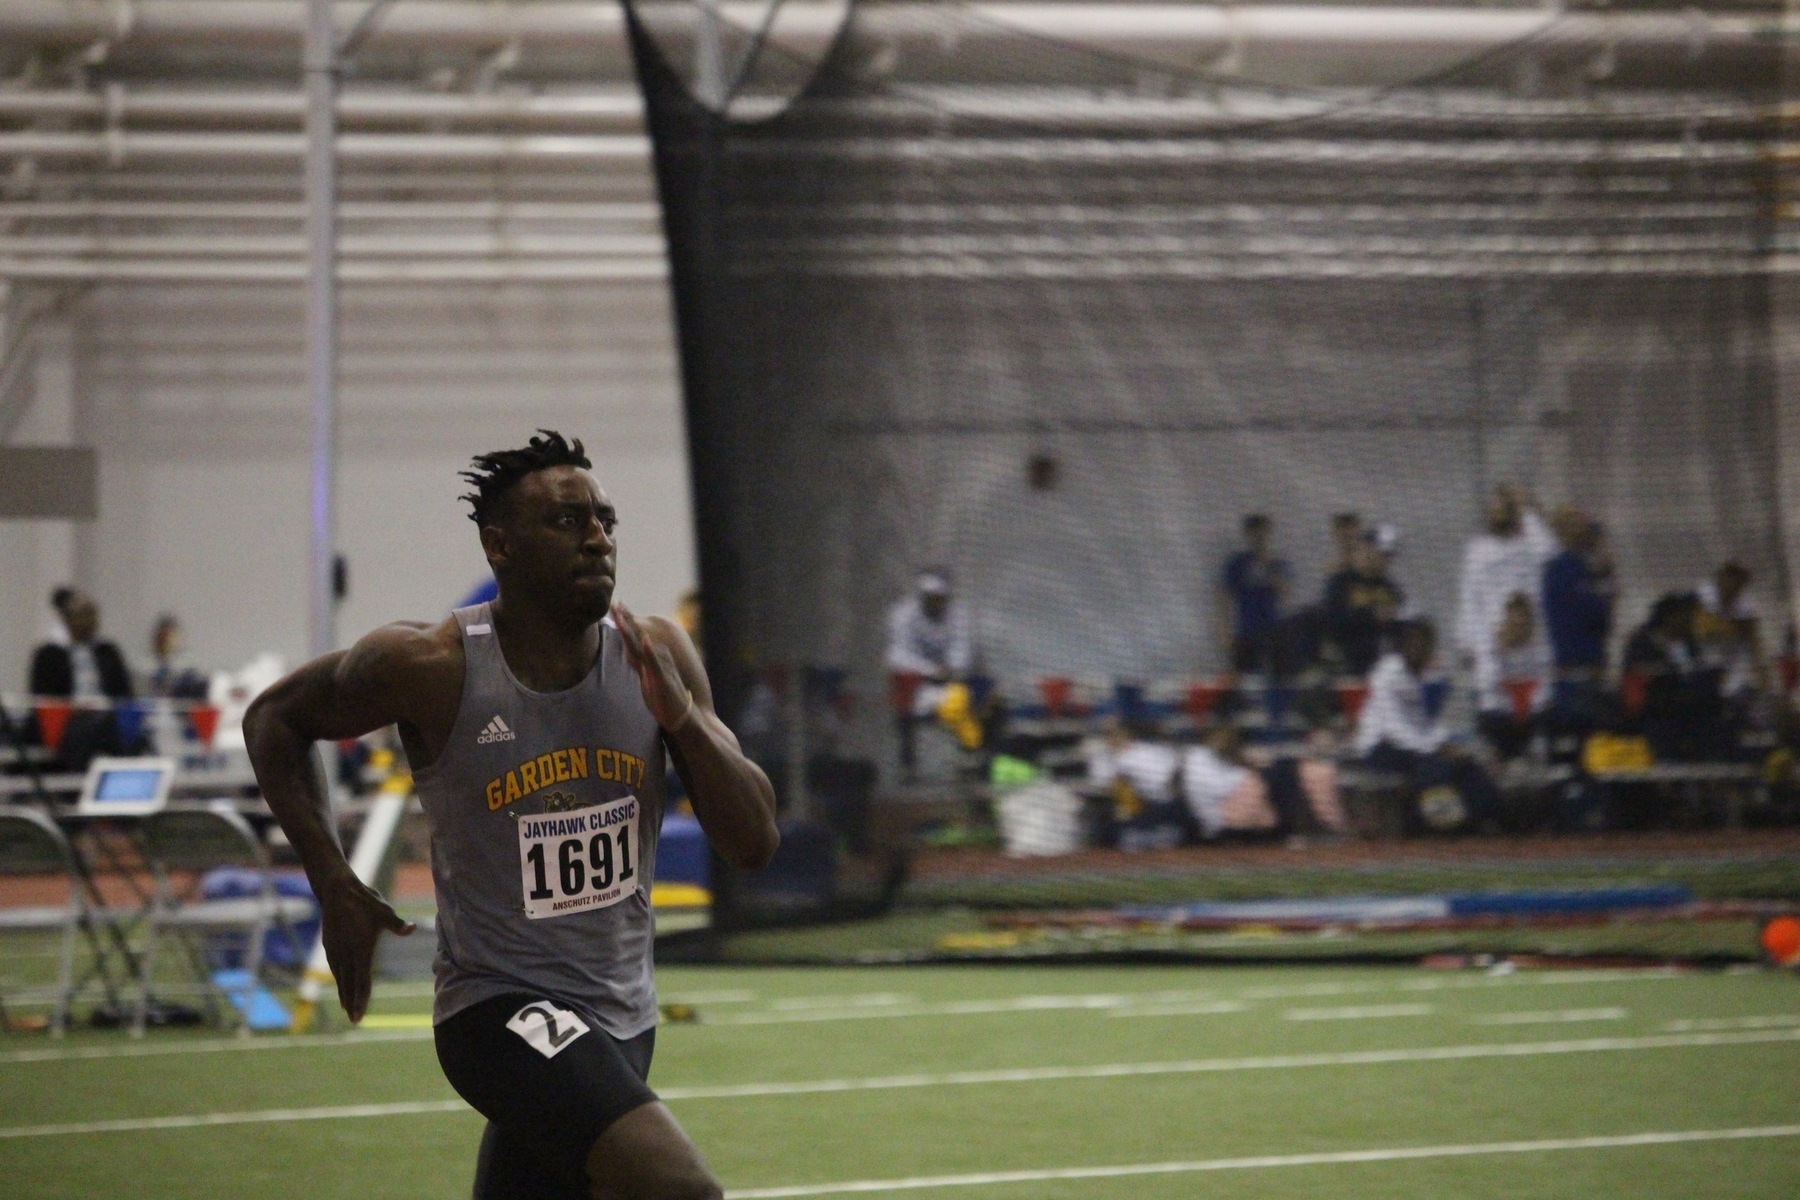 Broncbusters with strong showing at Jayhawk Classic